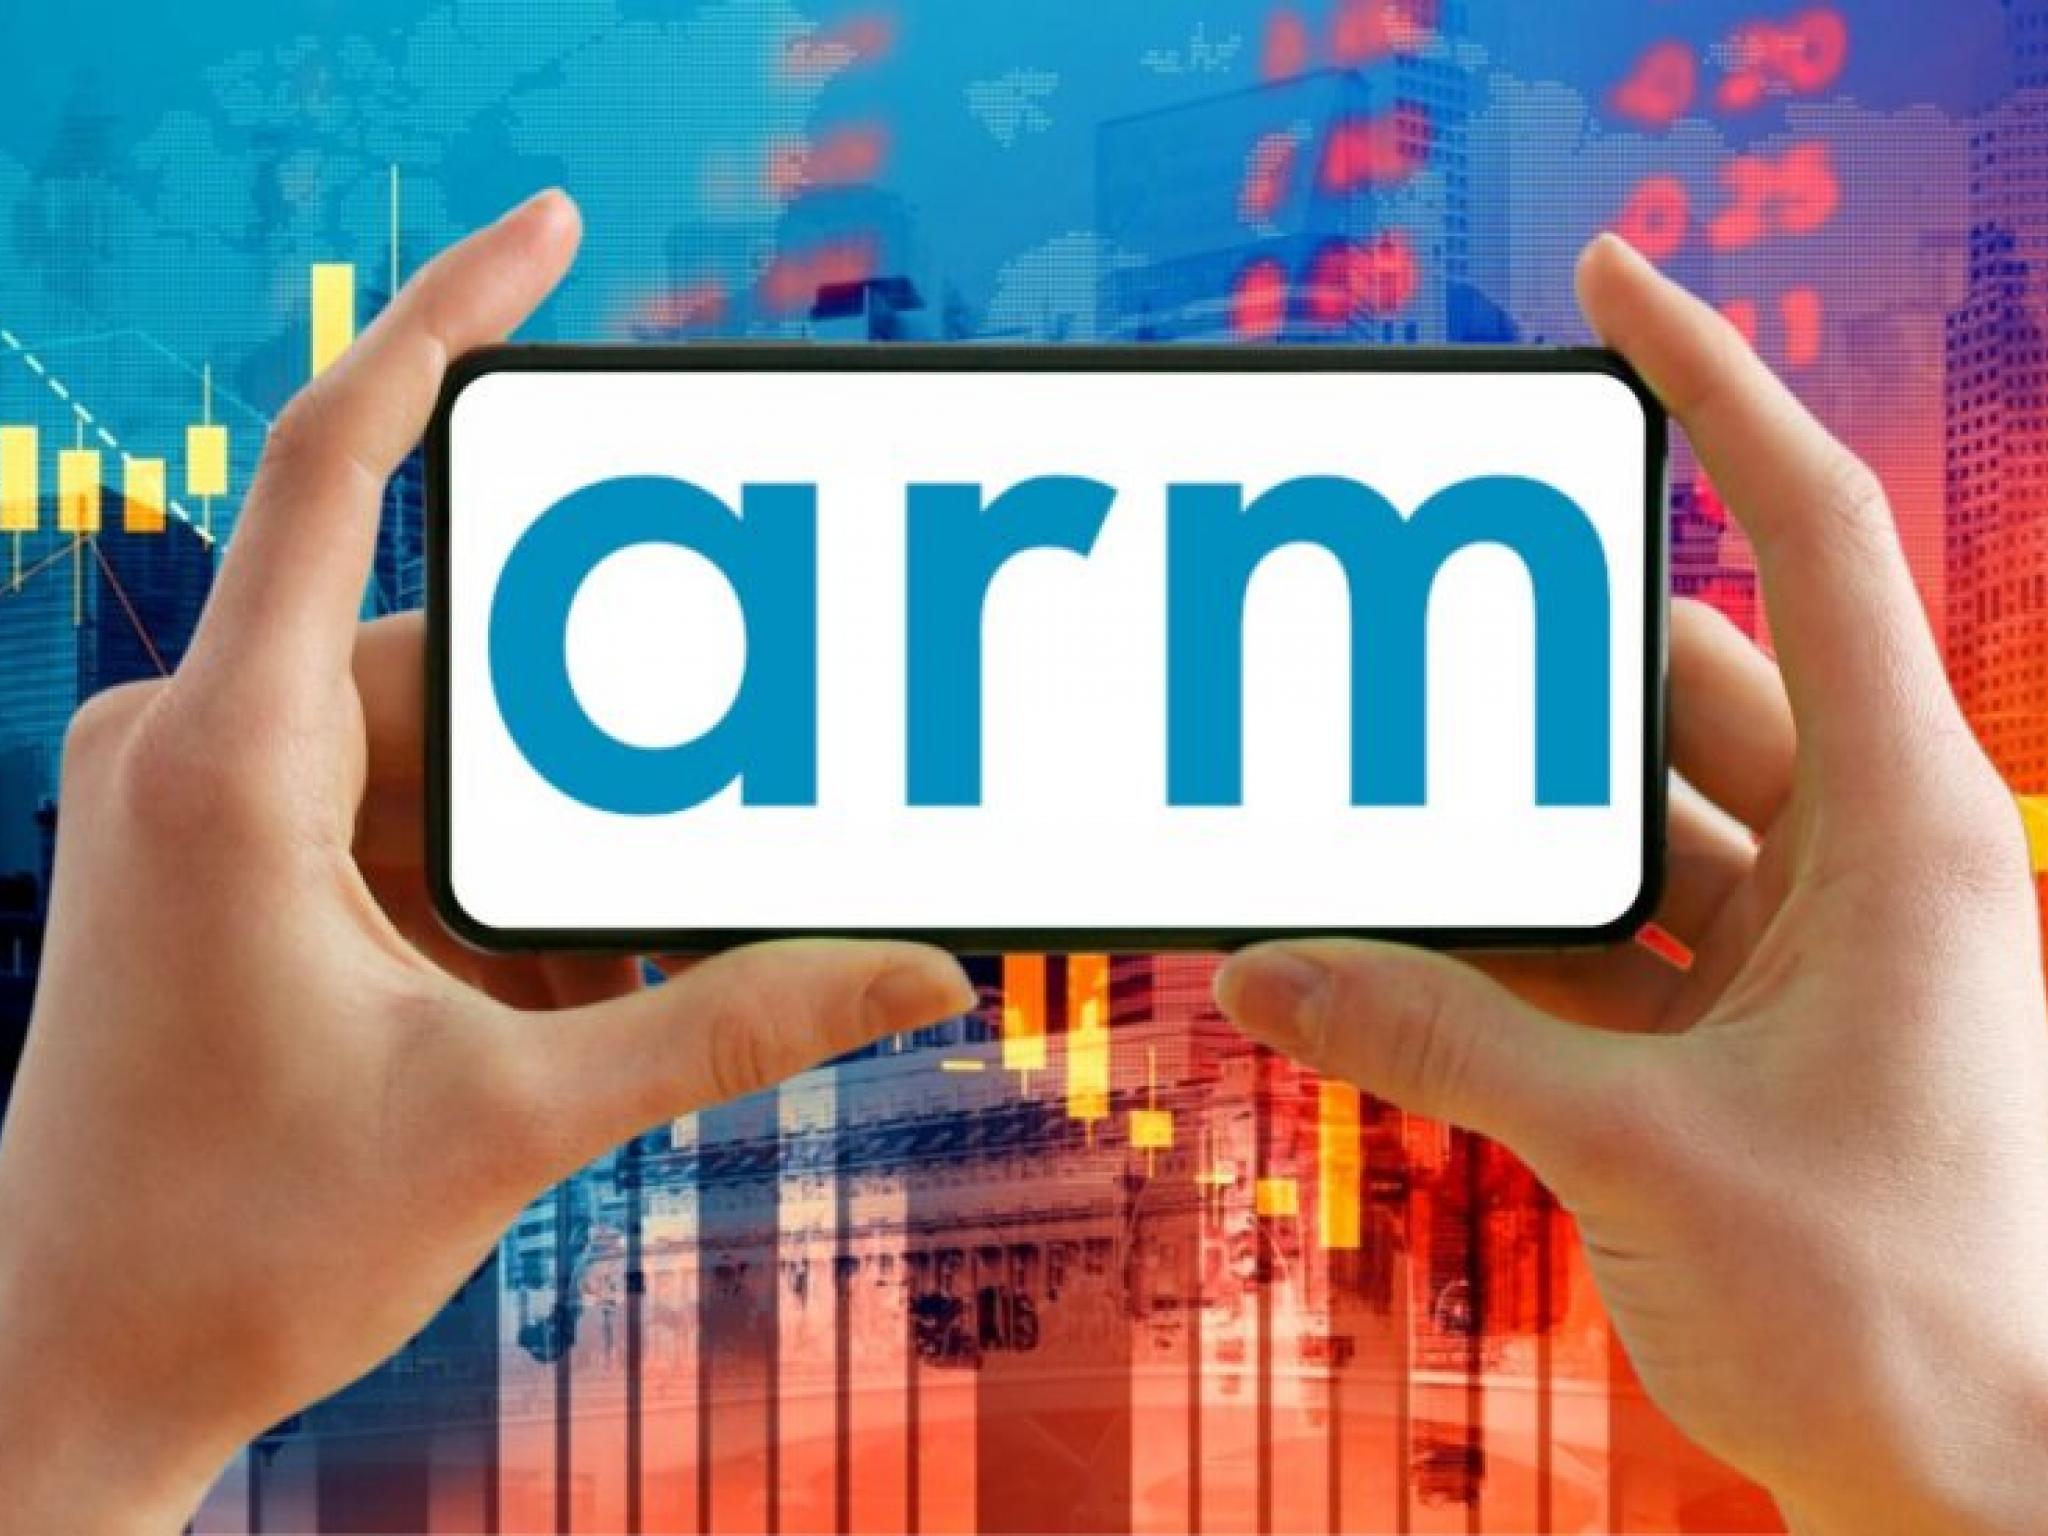  whats-going-on-with-arm-holdings-stock 